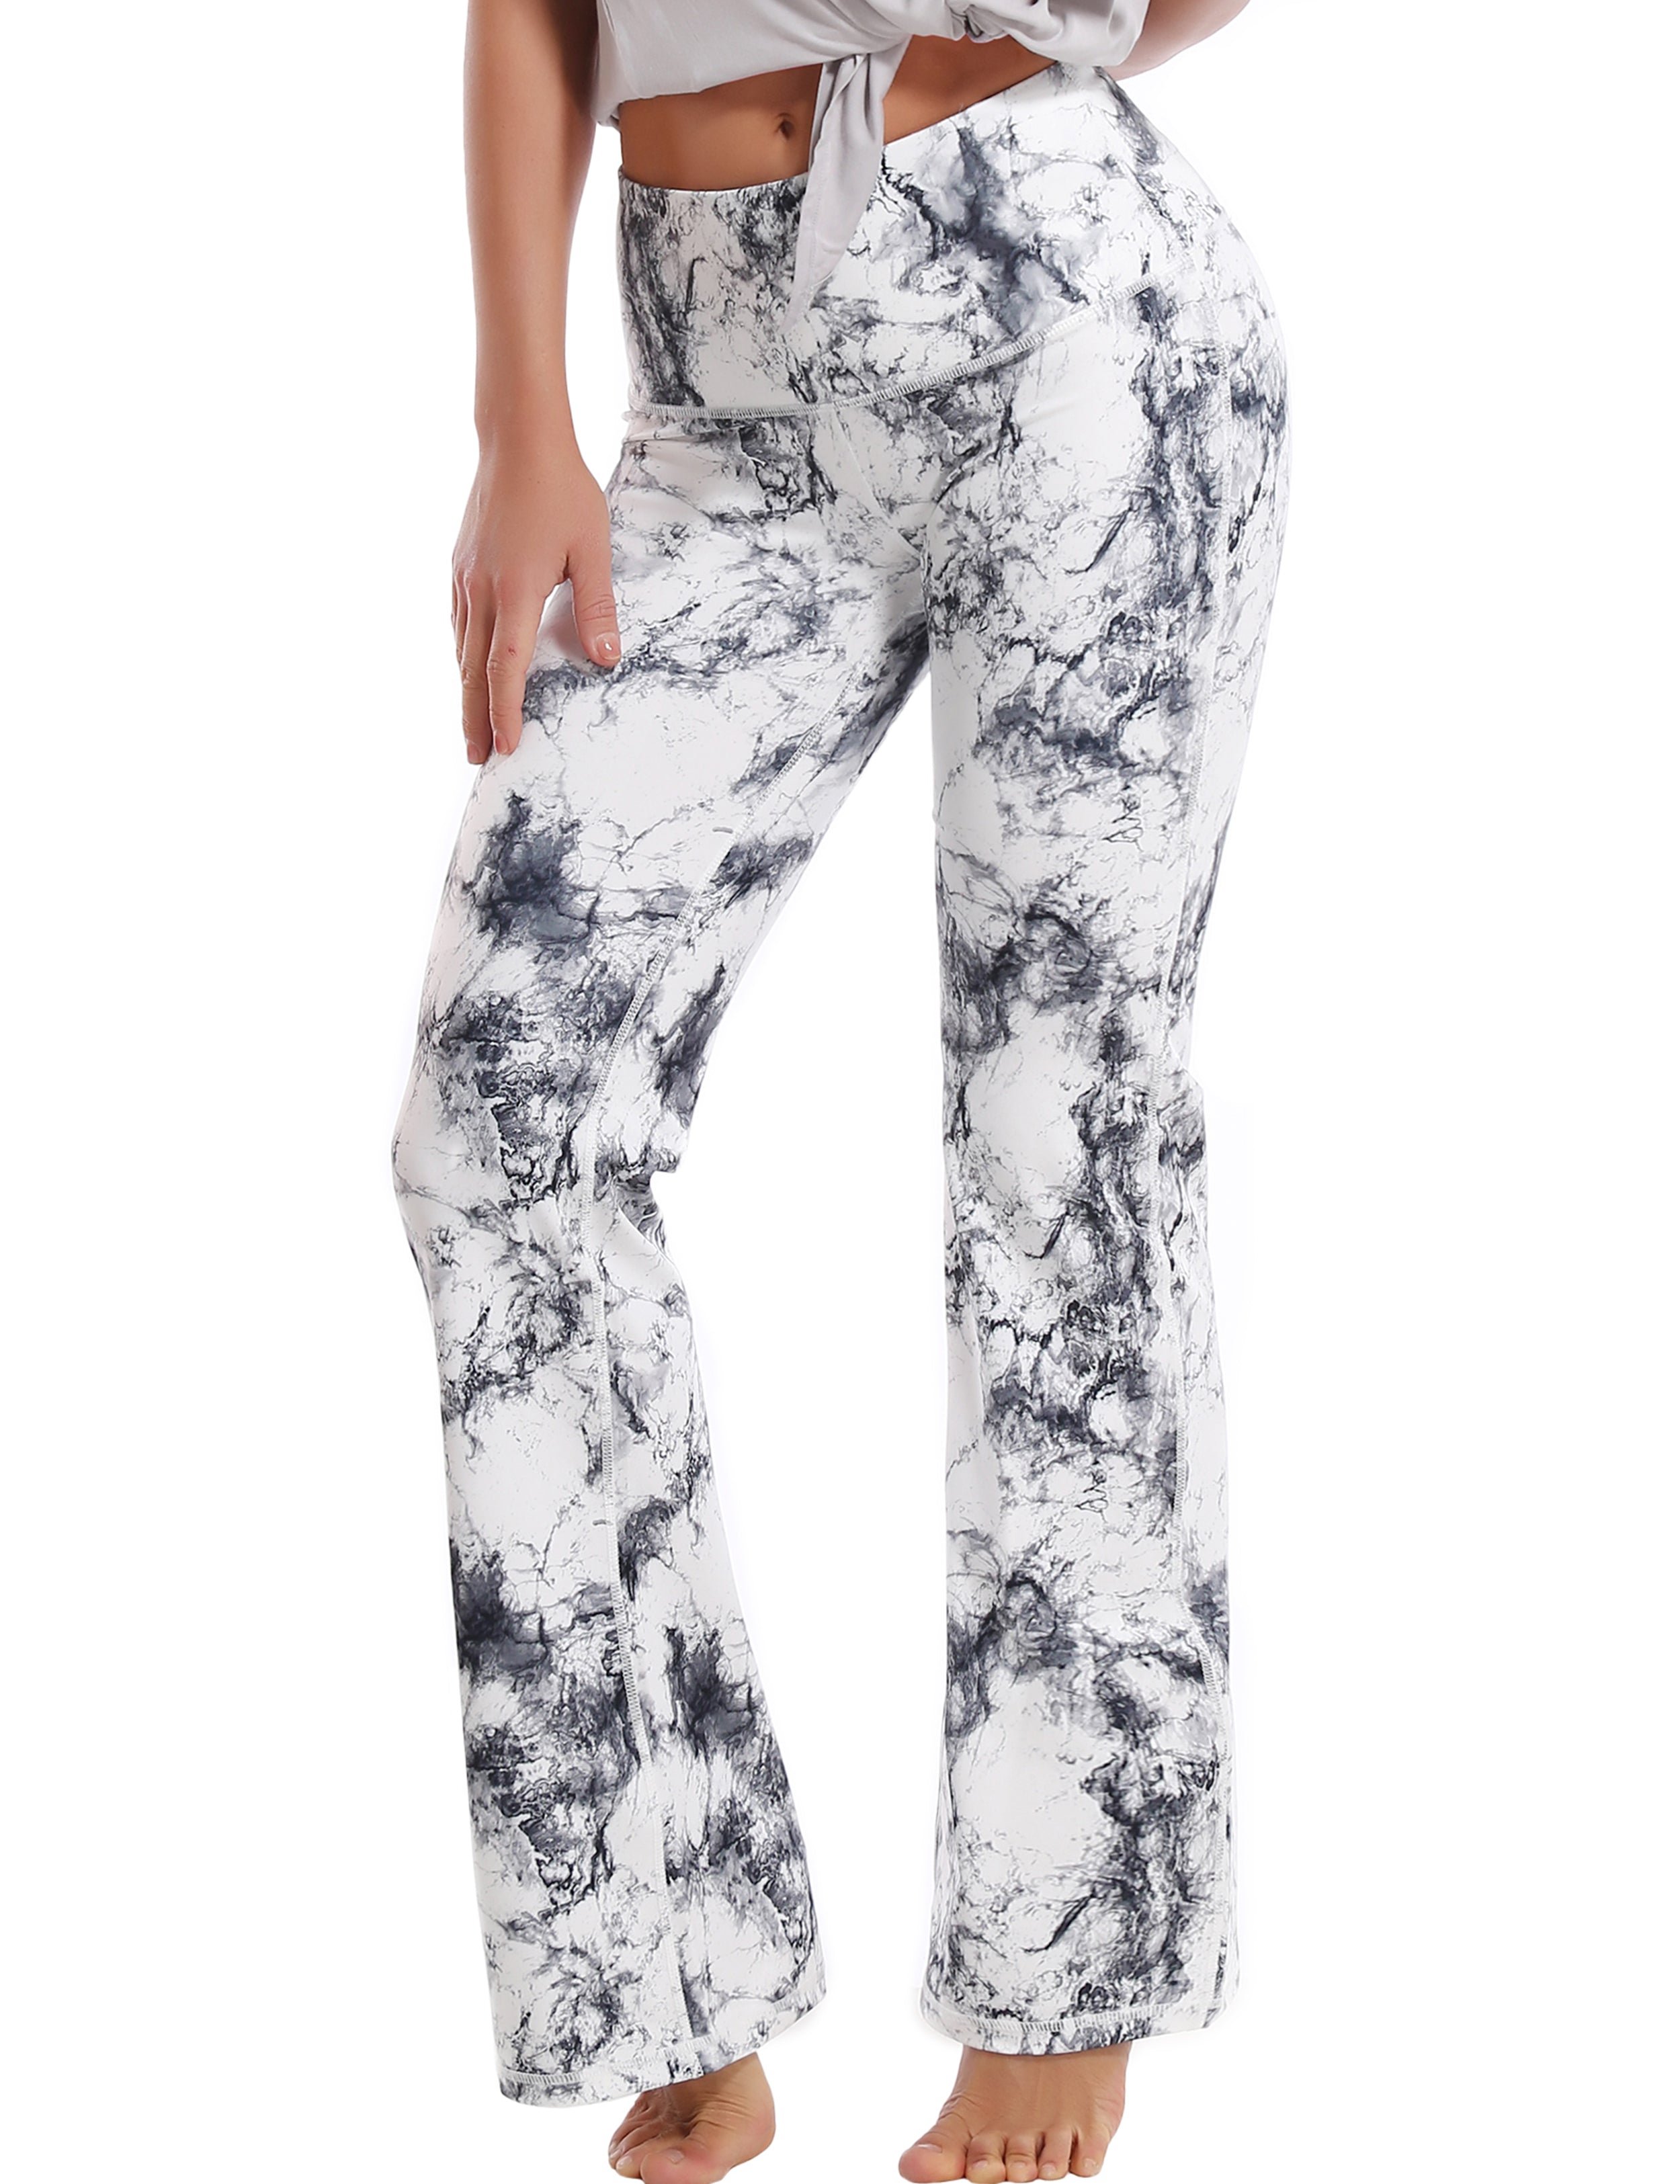 High Waist Printed Bootcut Leggings Arabescato 78%Polyester/22%Spandex Fabric doesn't attract lint easily 4-way stretch No see-through Moisture-wicking Tummy control Inner pocket Five lengths